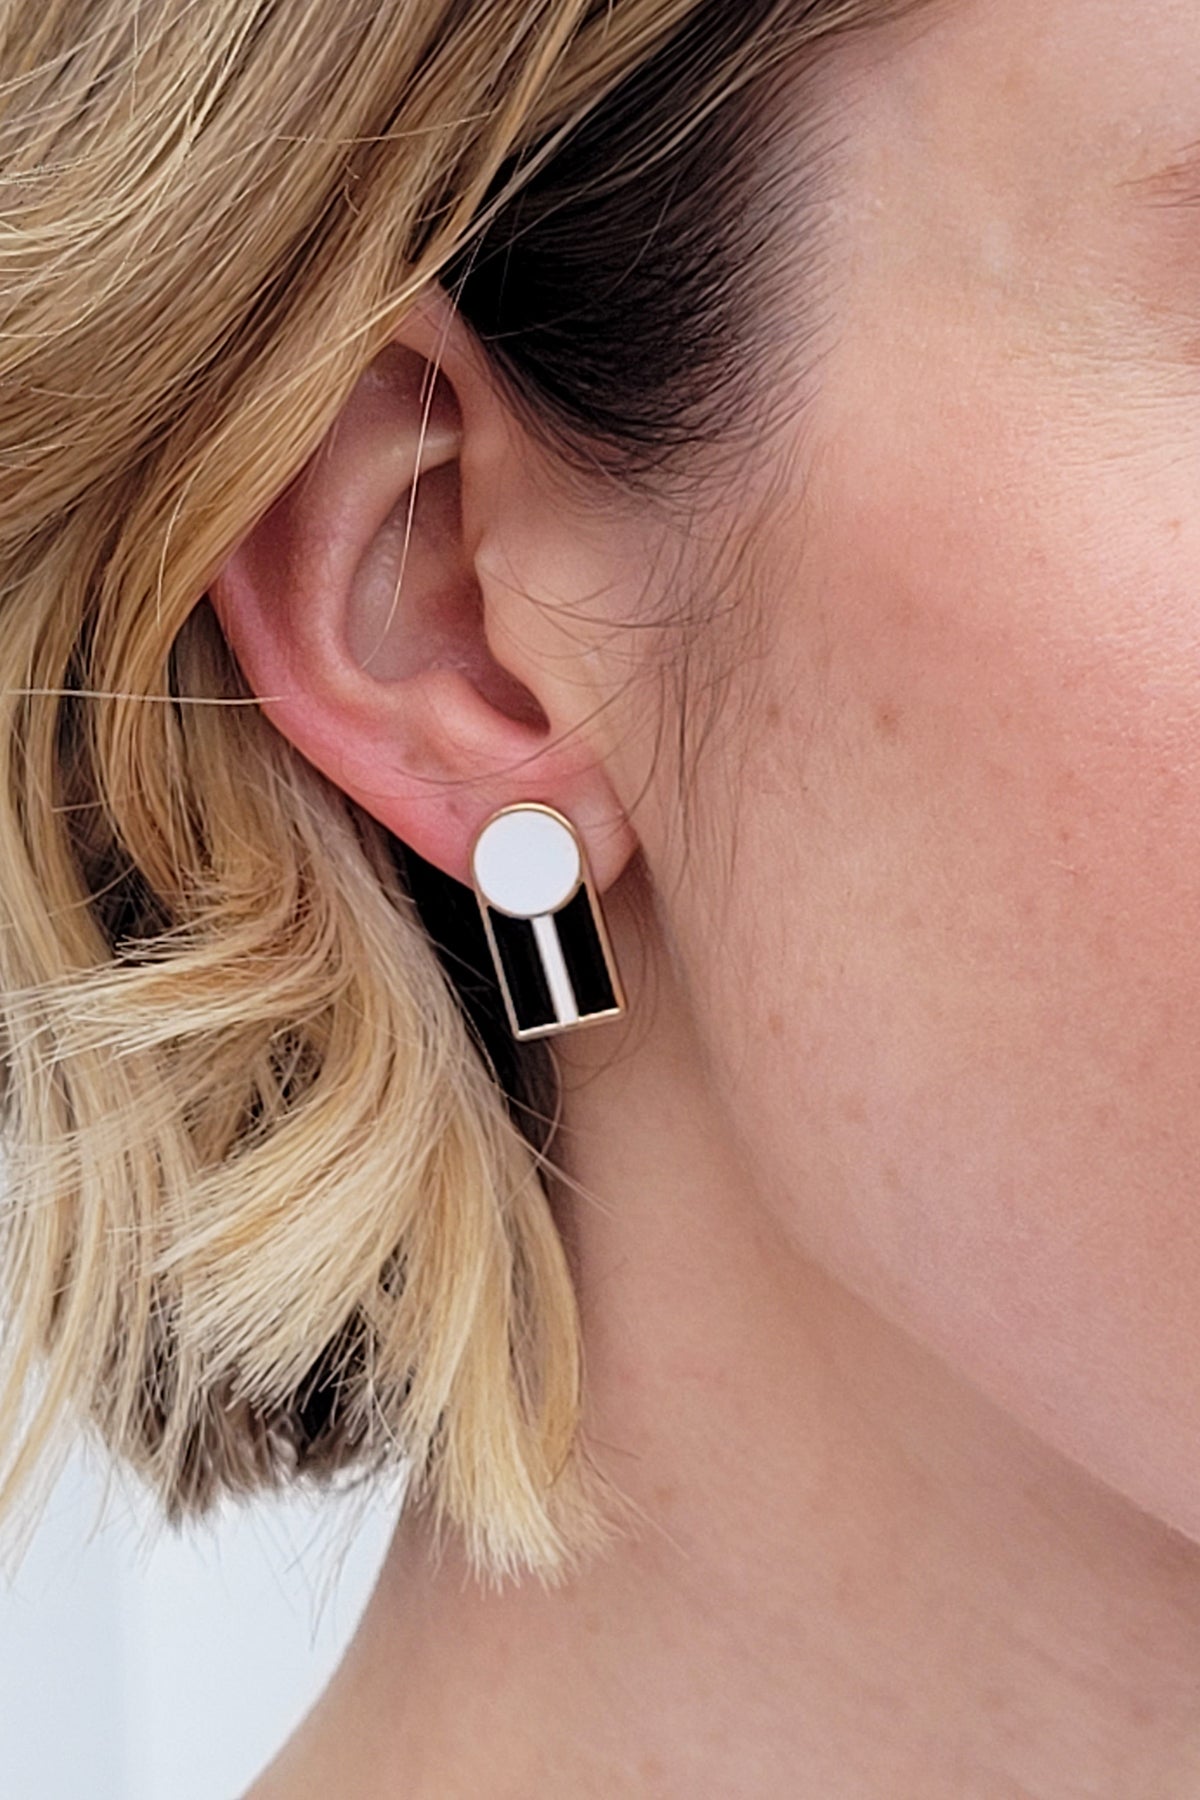 A close up of a lady with short blonde hair wearing a pair of the Graduate studs in the white with black colourway.